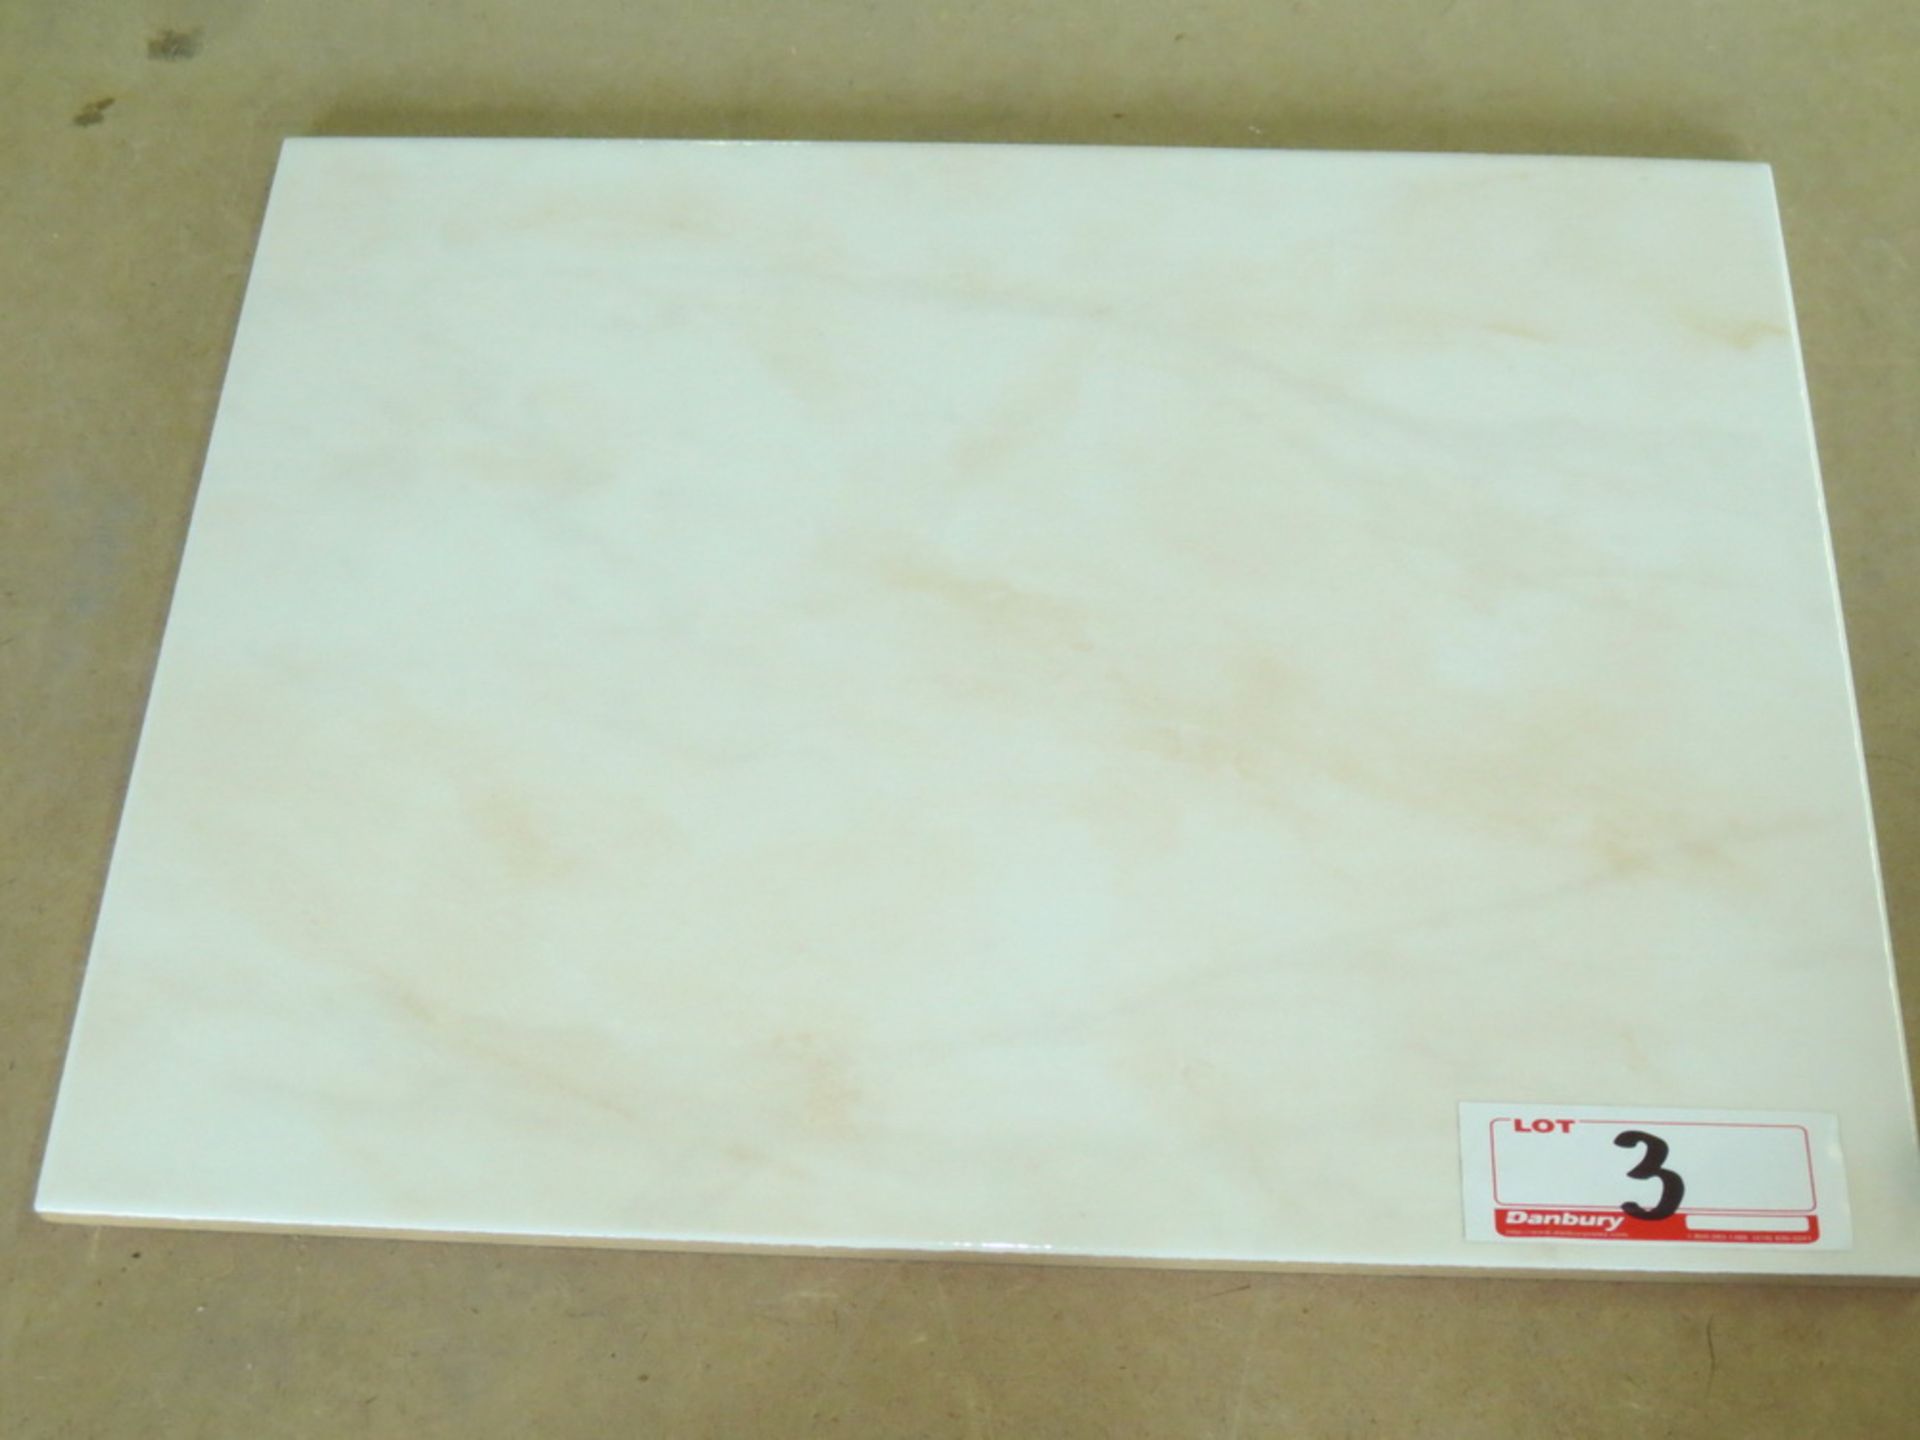 65 - SQ. FT. PALACE BEIGE APPROX 10X13 CERAMIC TILE 4 BOXES